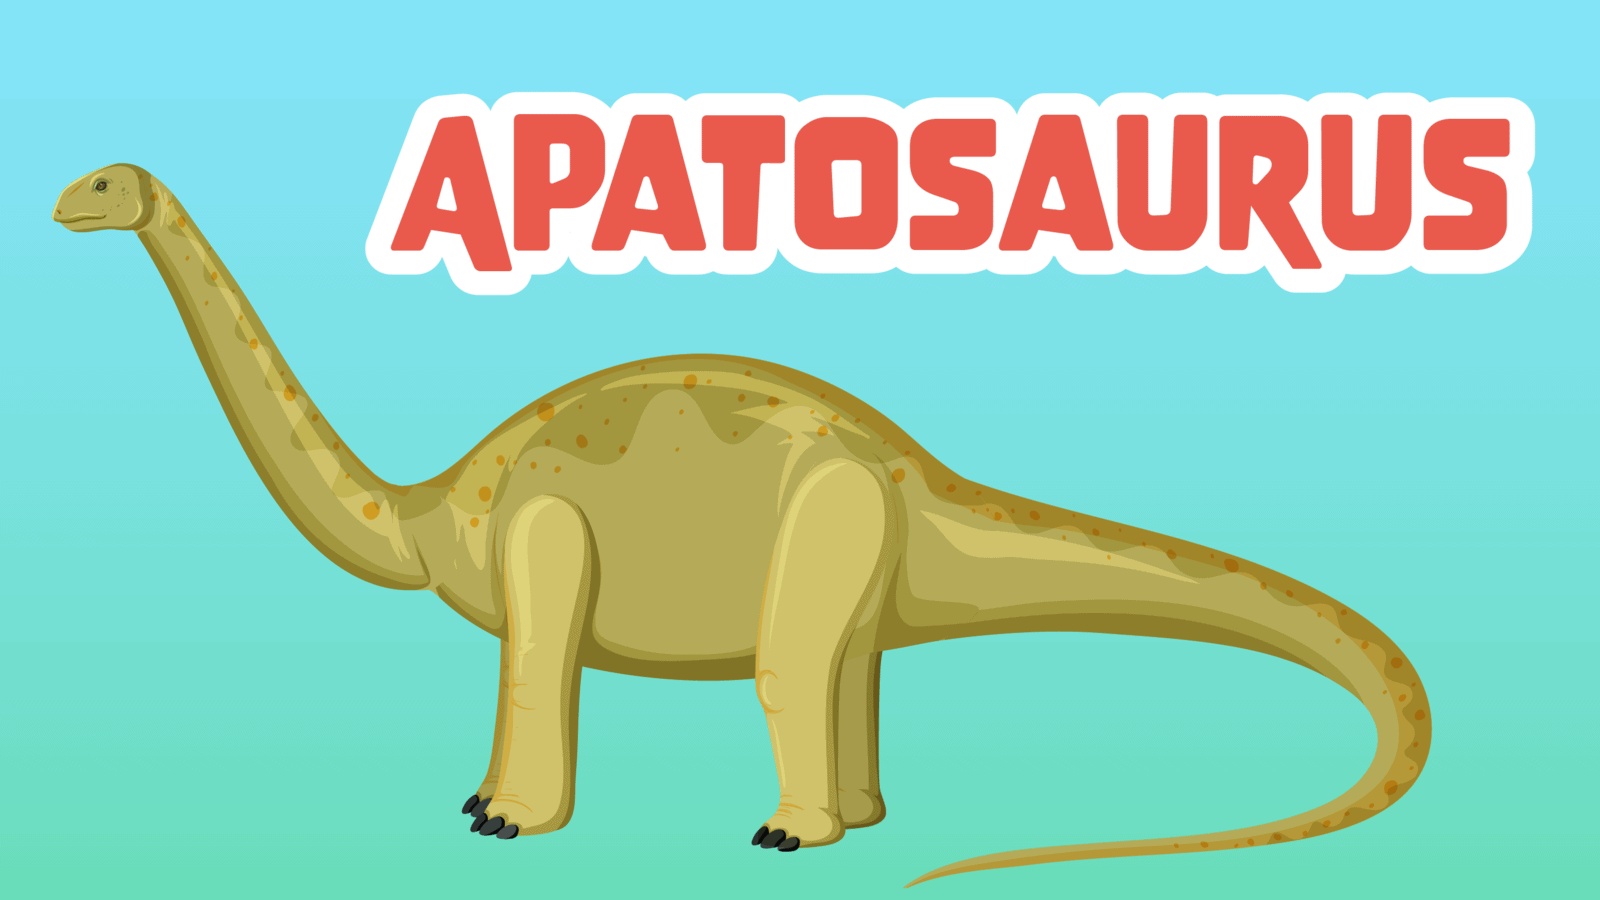 Apatosaurus Facts for Kids – 5 Awesome Facts about Apatosaurus